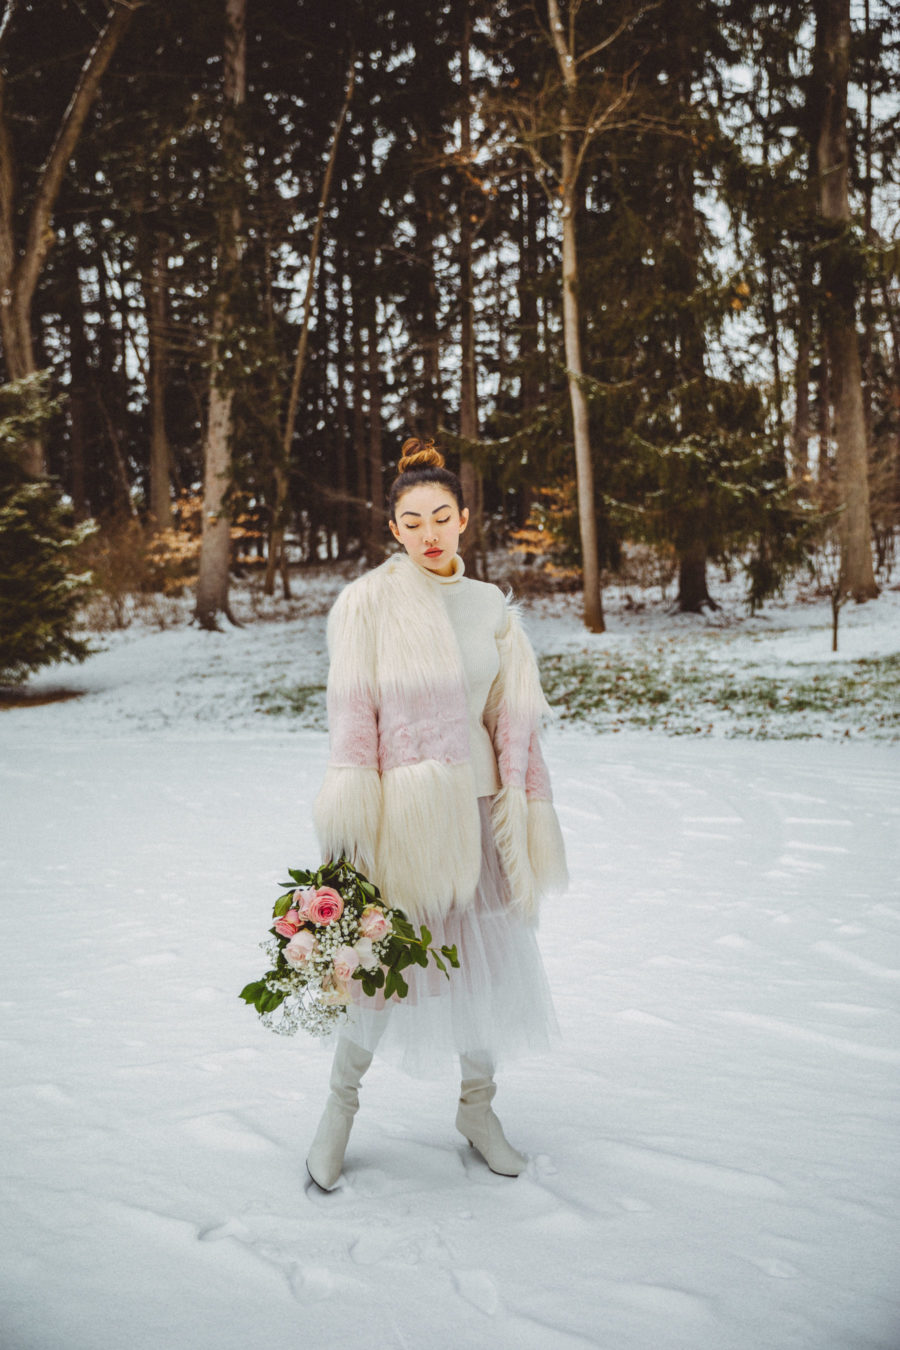 Dressy Winter Outfits - White and Pink Fur Coat with Tulle Skirt and White Sweater // Notjessfashion.com // elegant winter outfit, dressy outfits for the snow, snow outfit, tulle midi skirt, white boots, winter white outfit, asian blogger, new york fashion blogger, winter fashion editorial